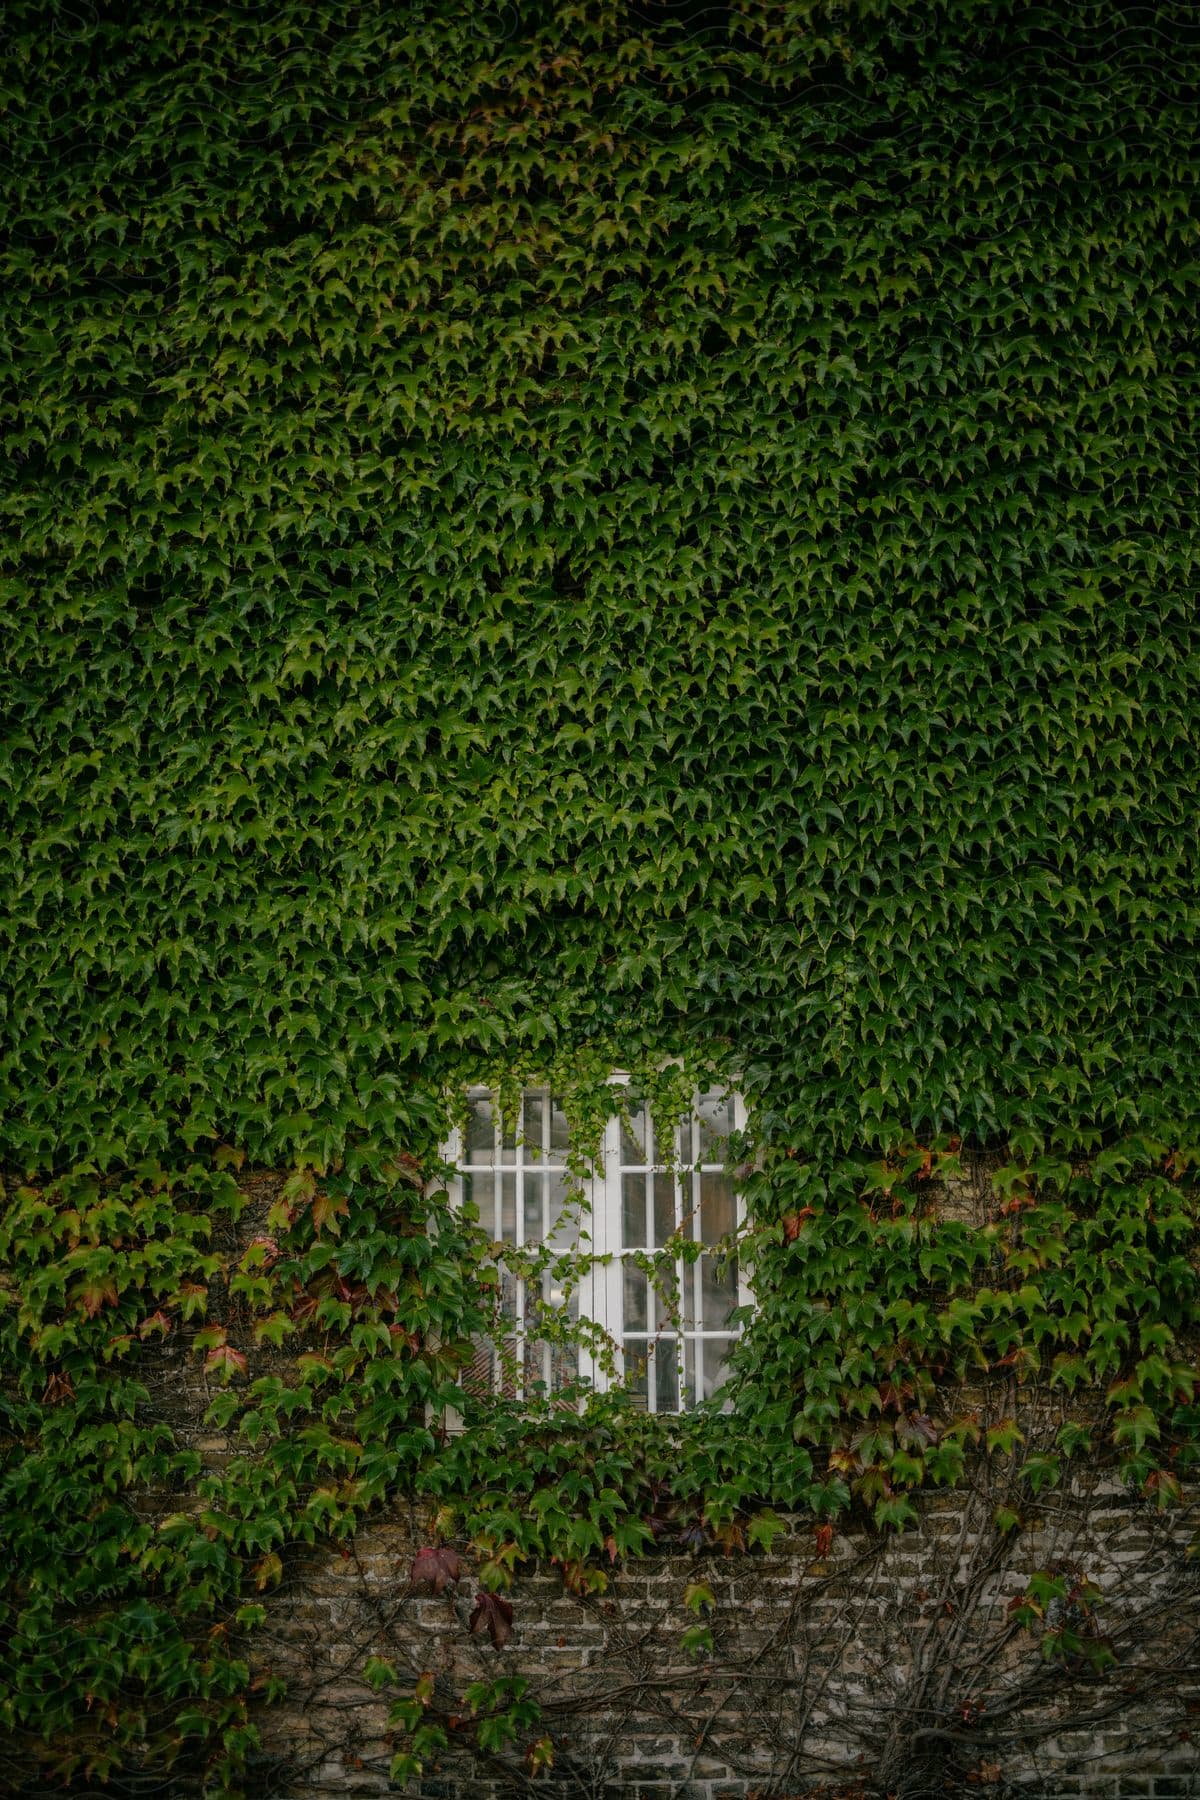 A white window surrounded by green foliage.